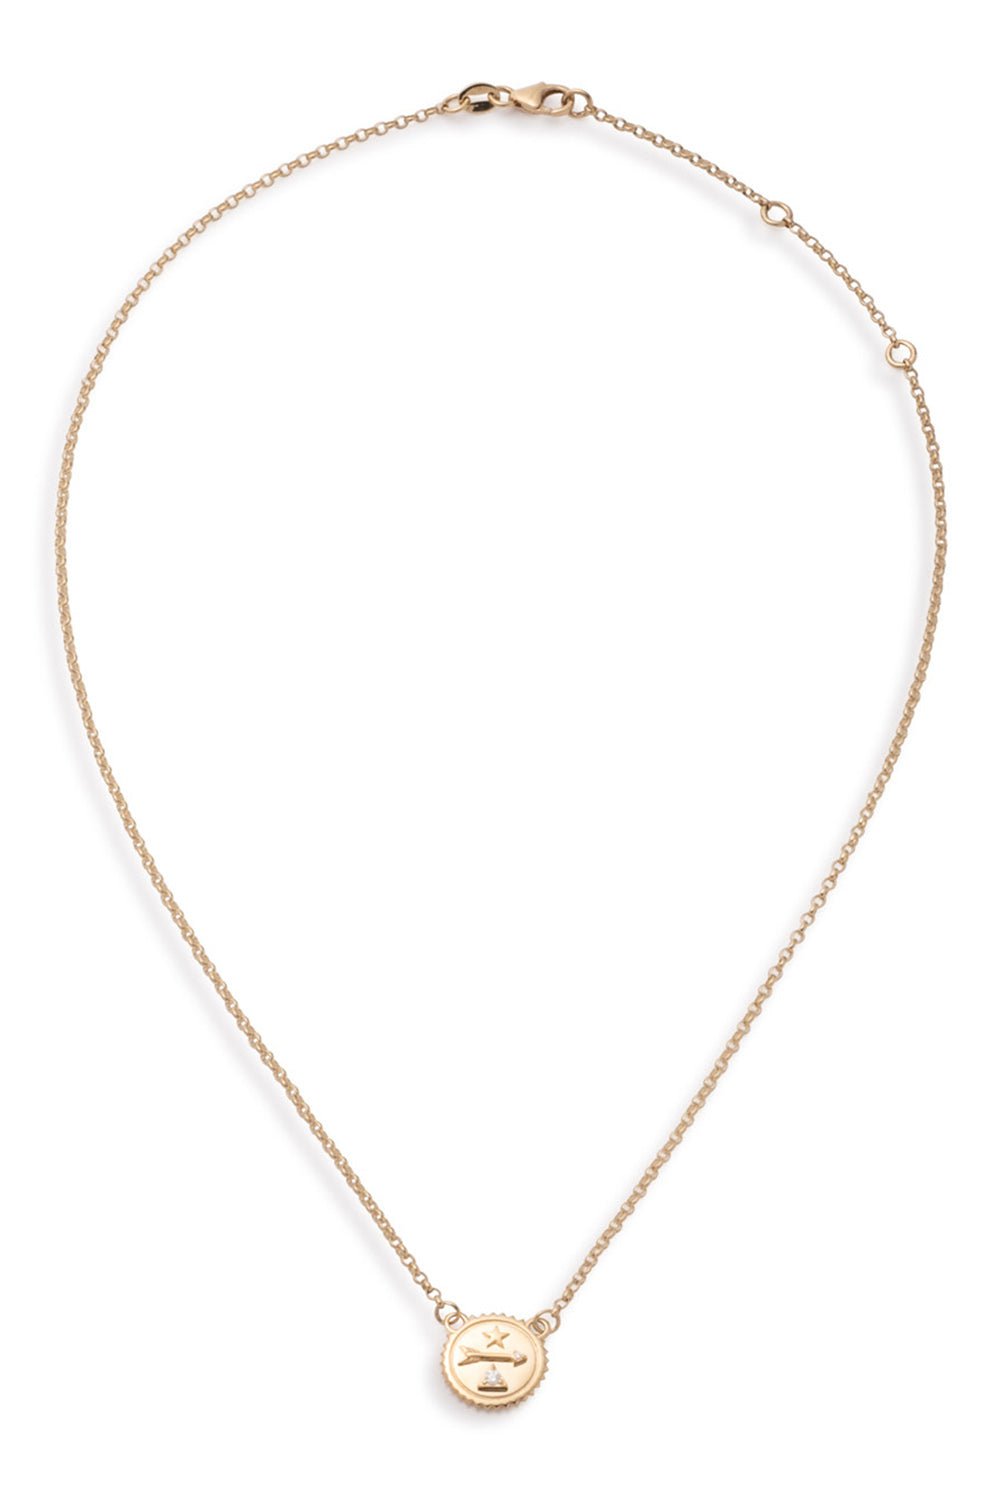 FOUNDRAE-Dream - Mini Stationary Necklace-YELLOW GOLD